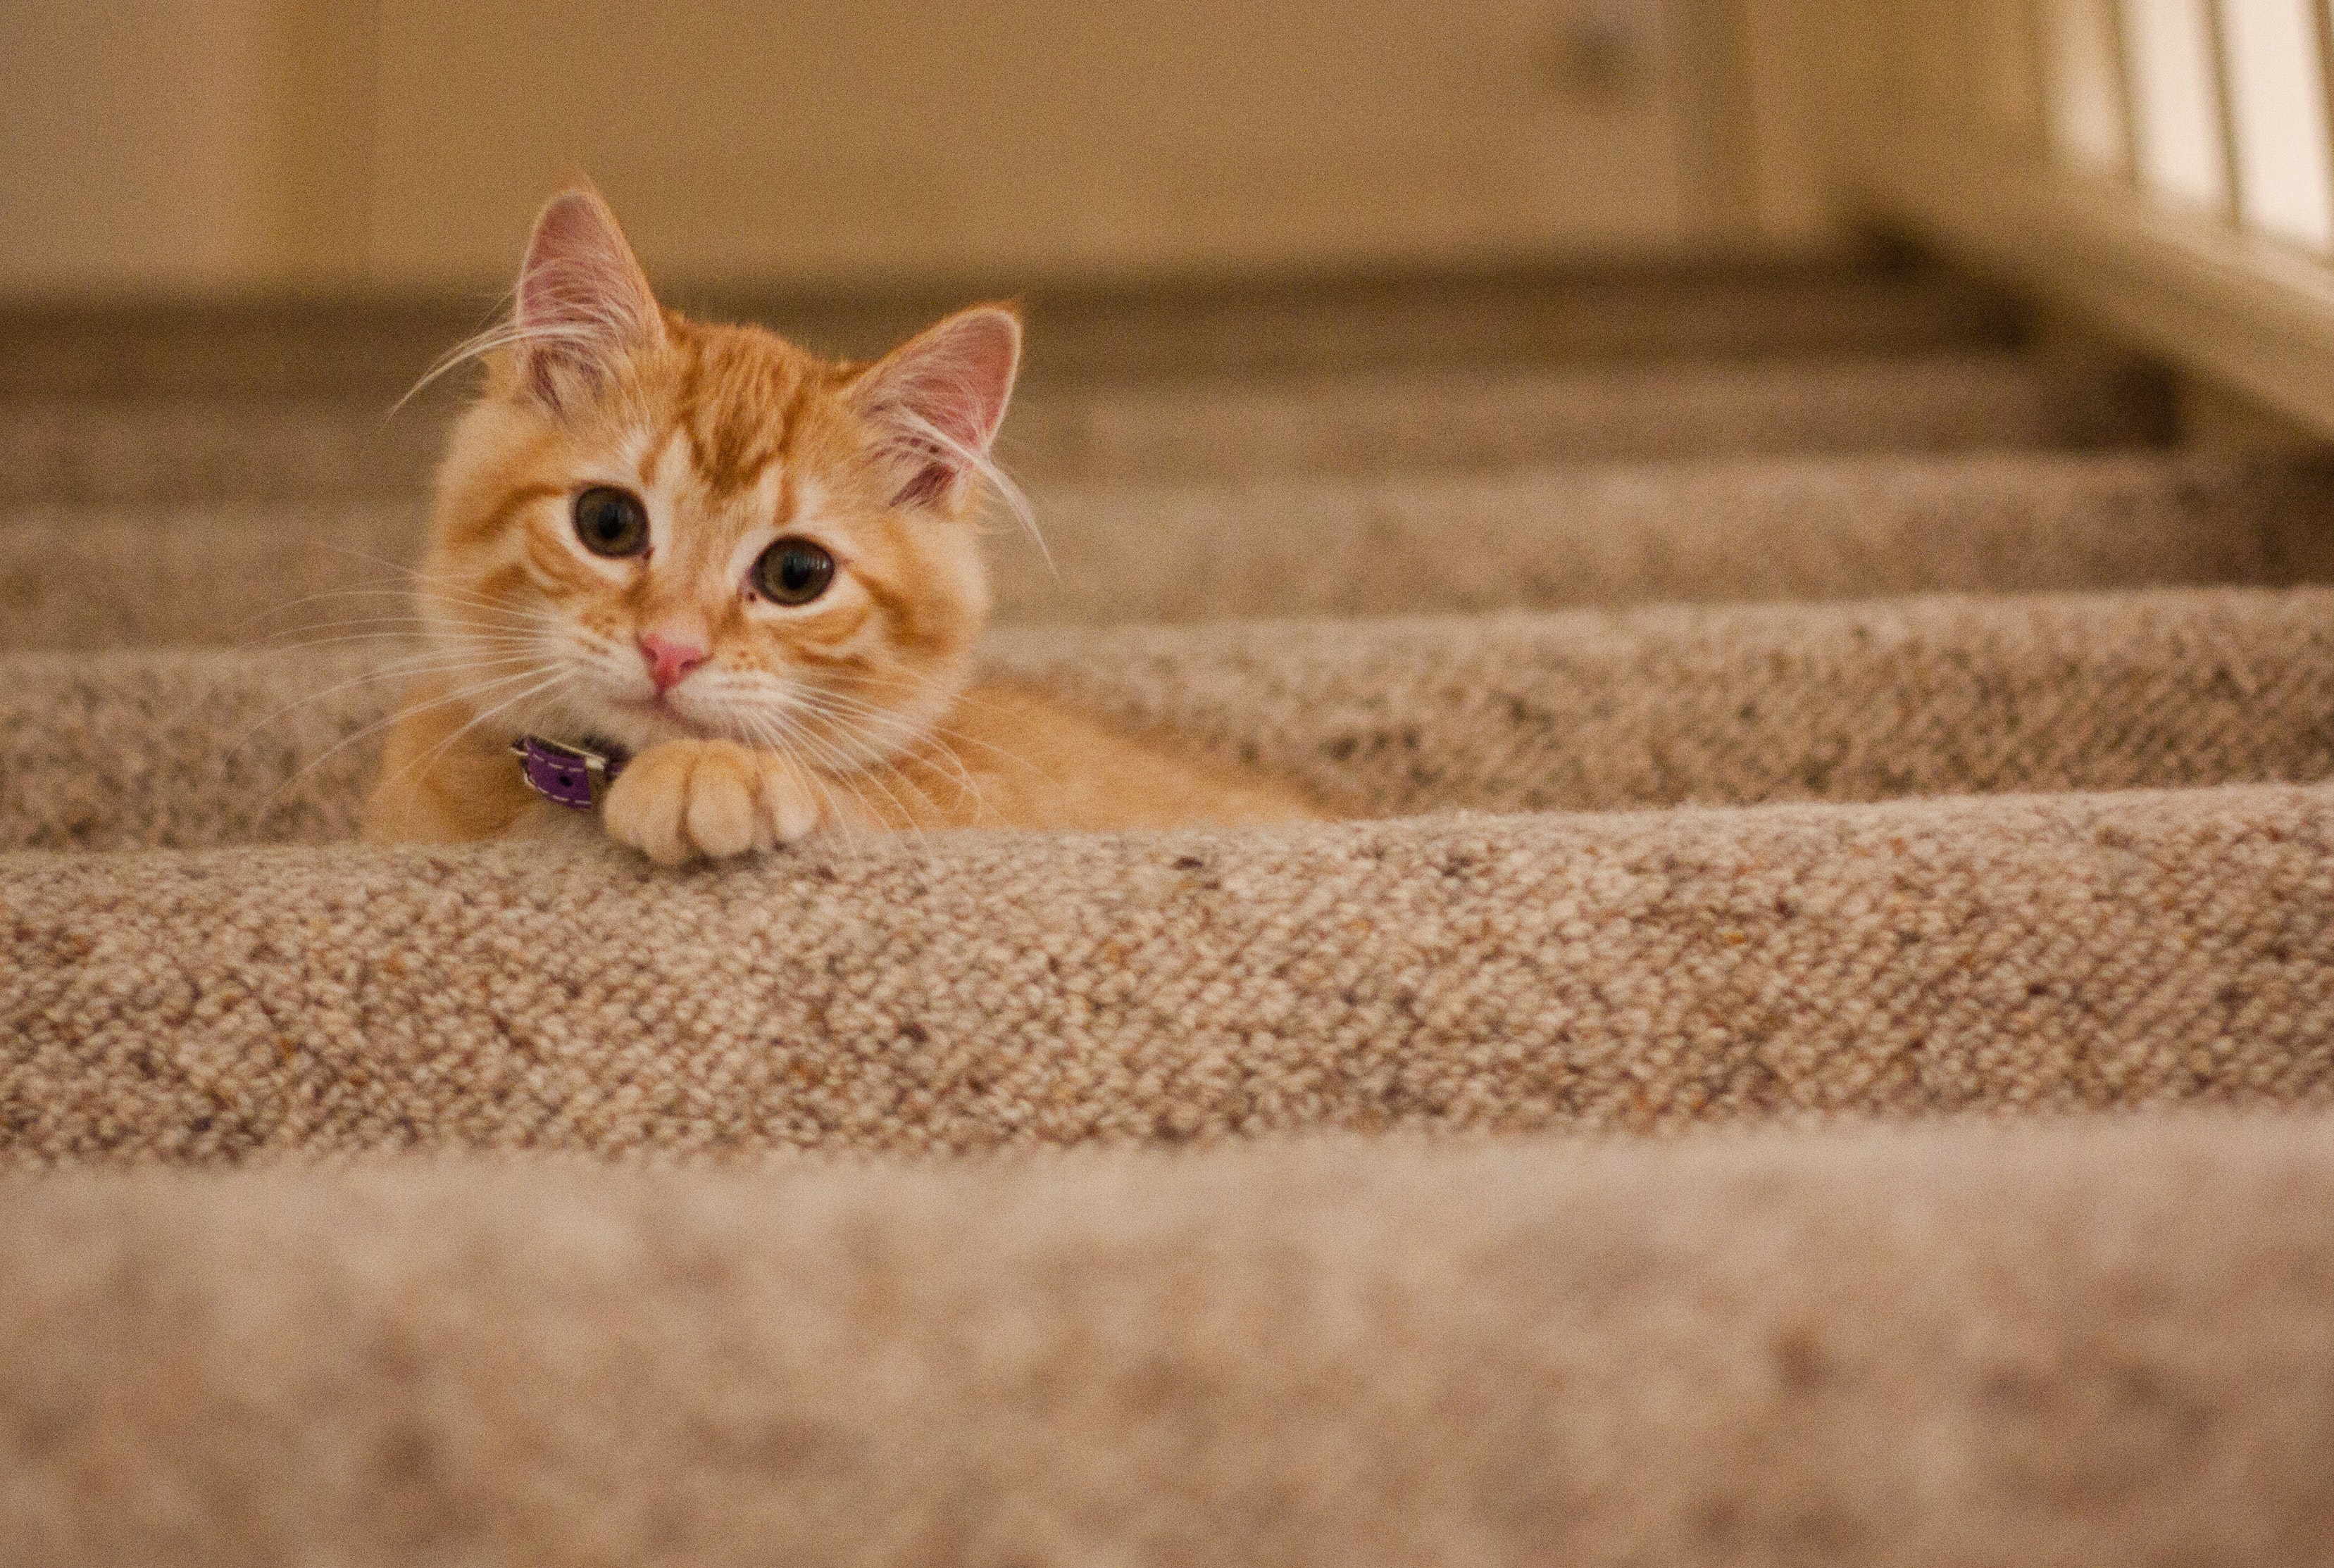 Our cleaning solution removes an average of 99.2% of the bacteria from pet urine stains in carpets.